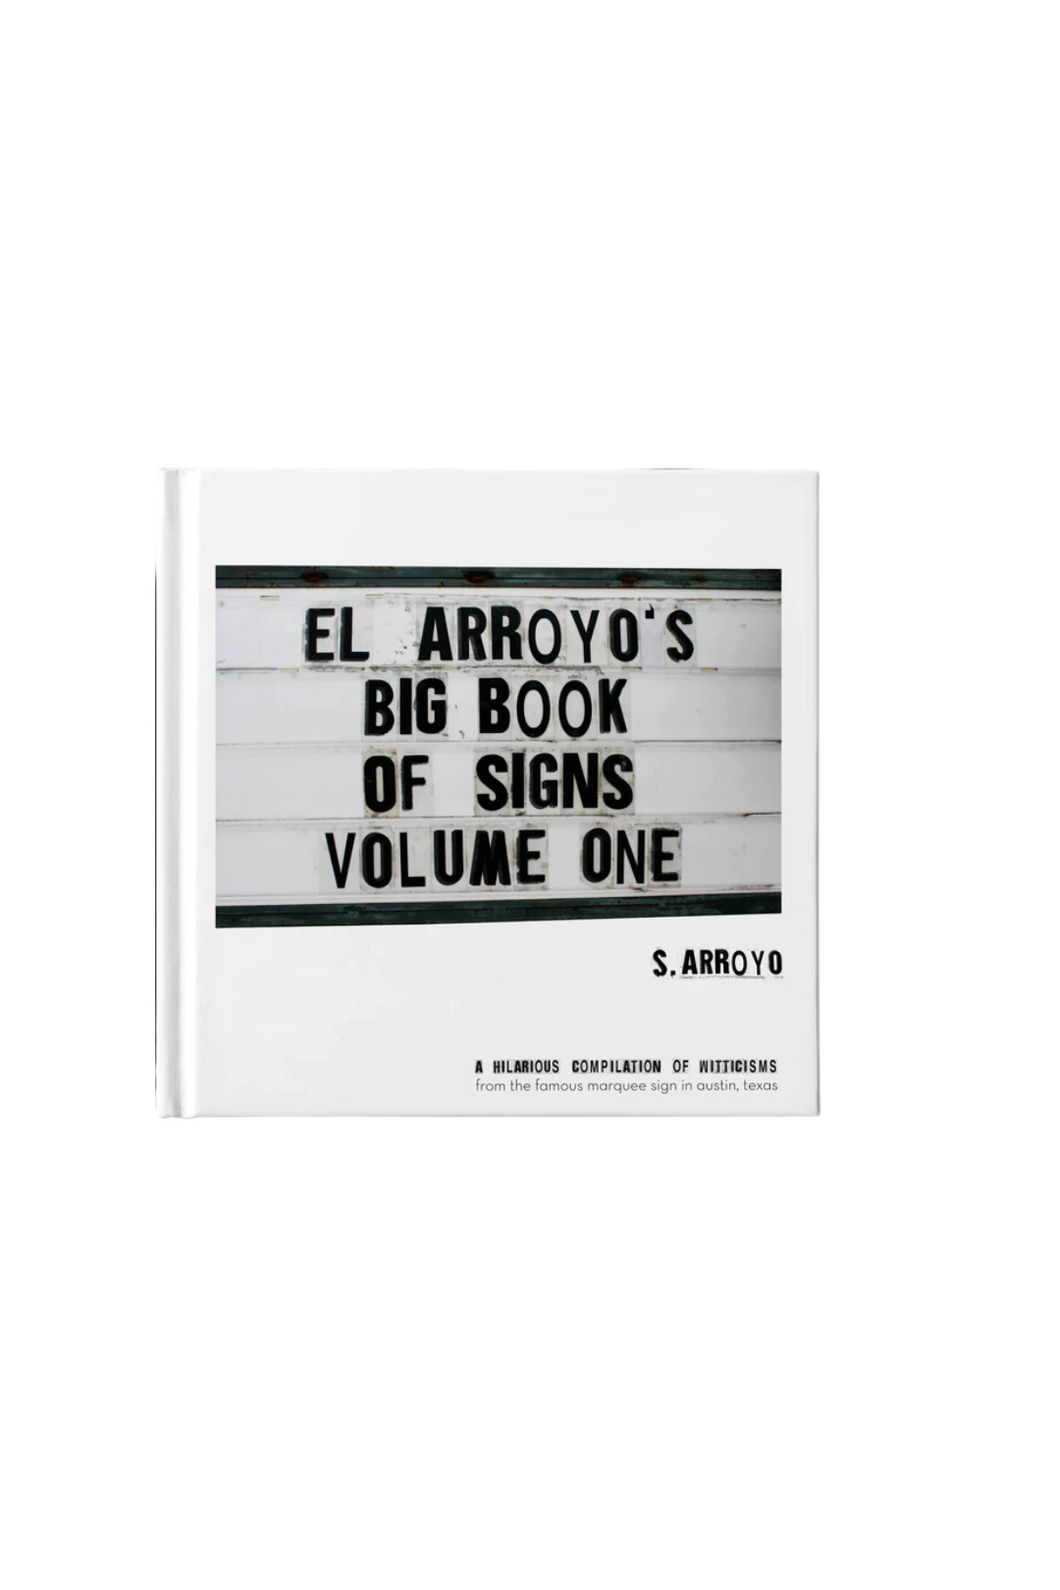 Big Book of Signs Volume One